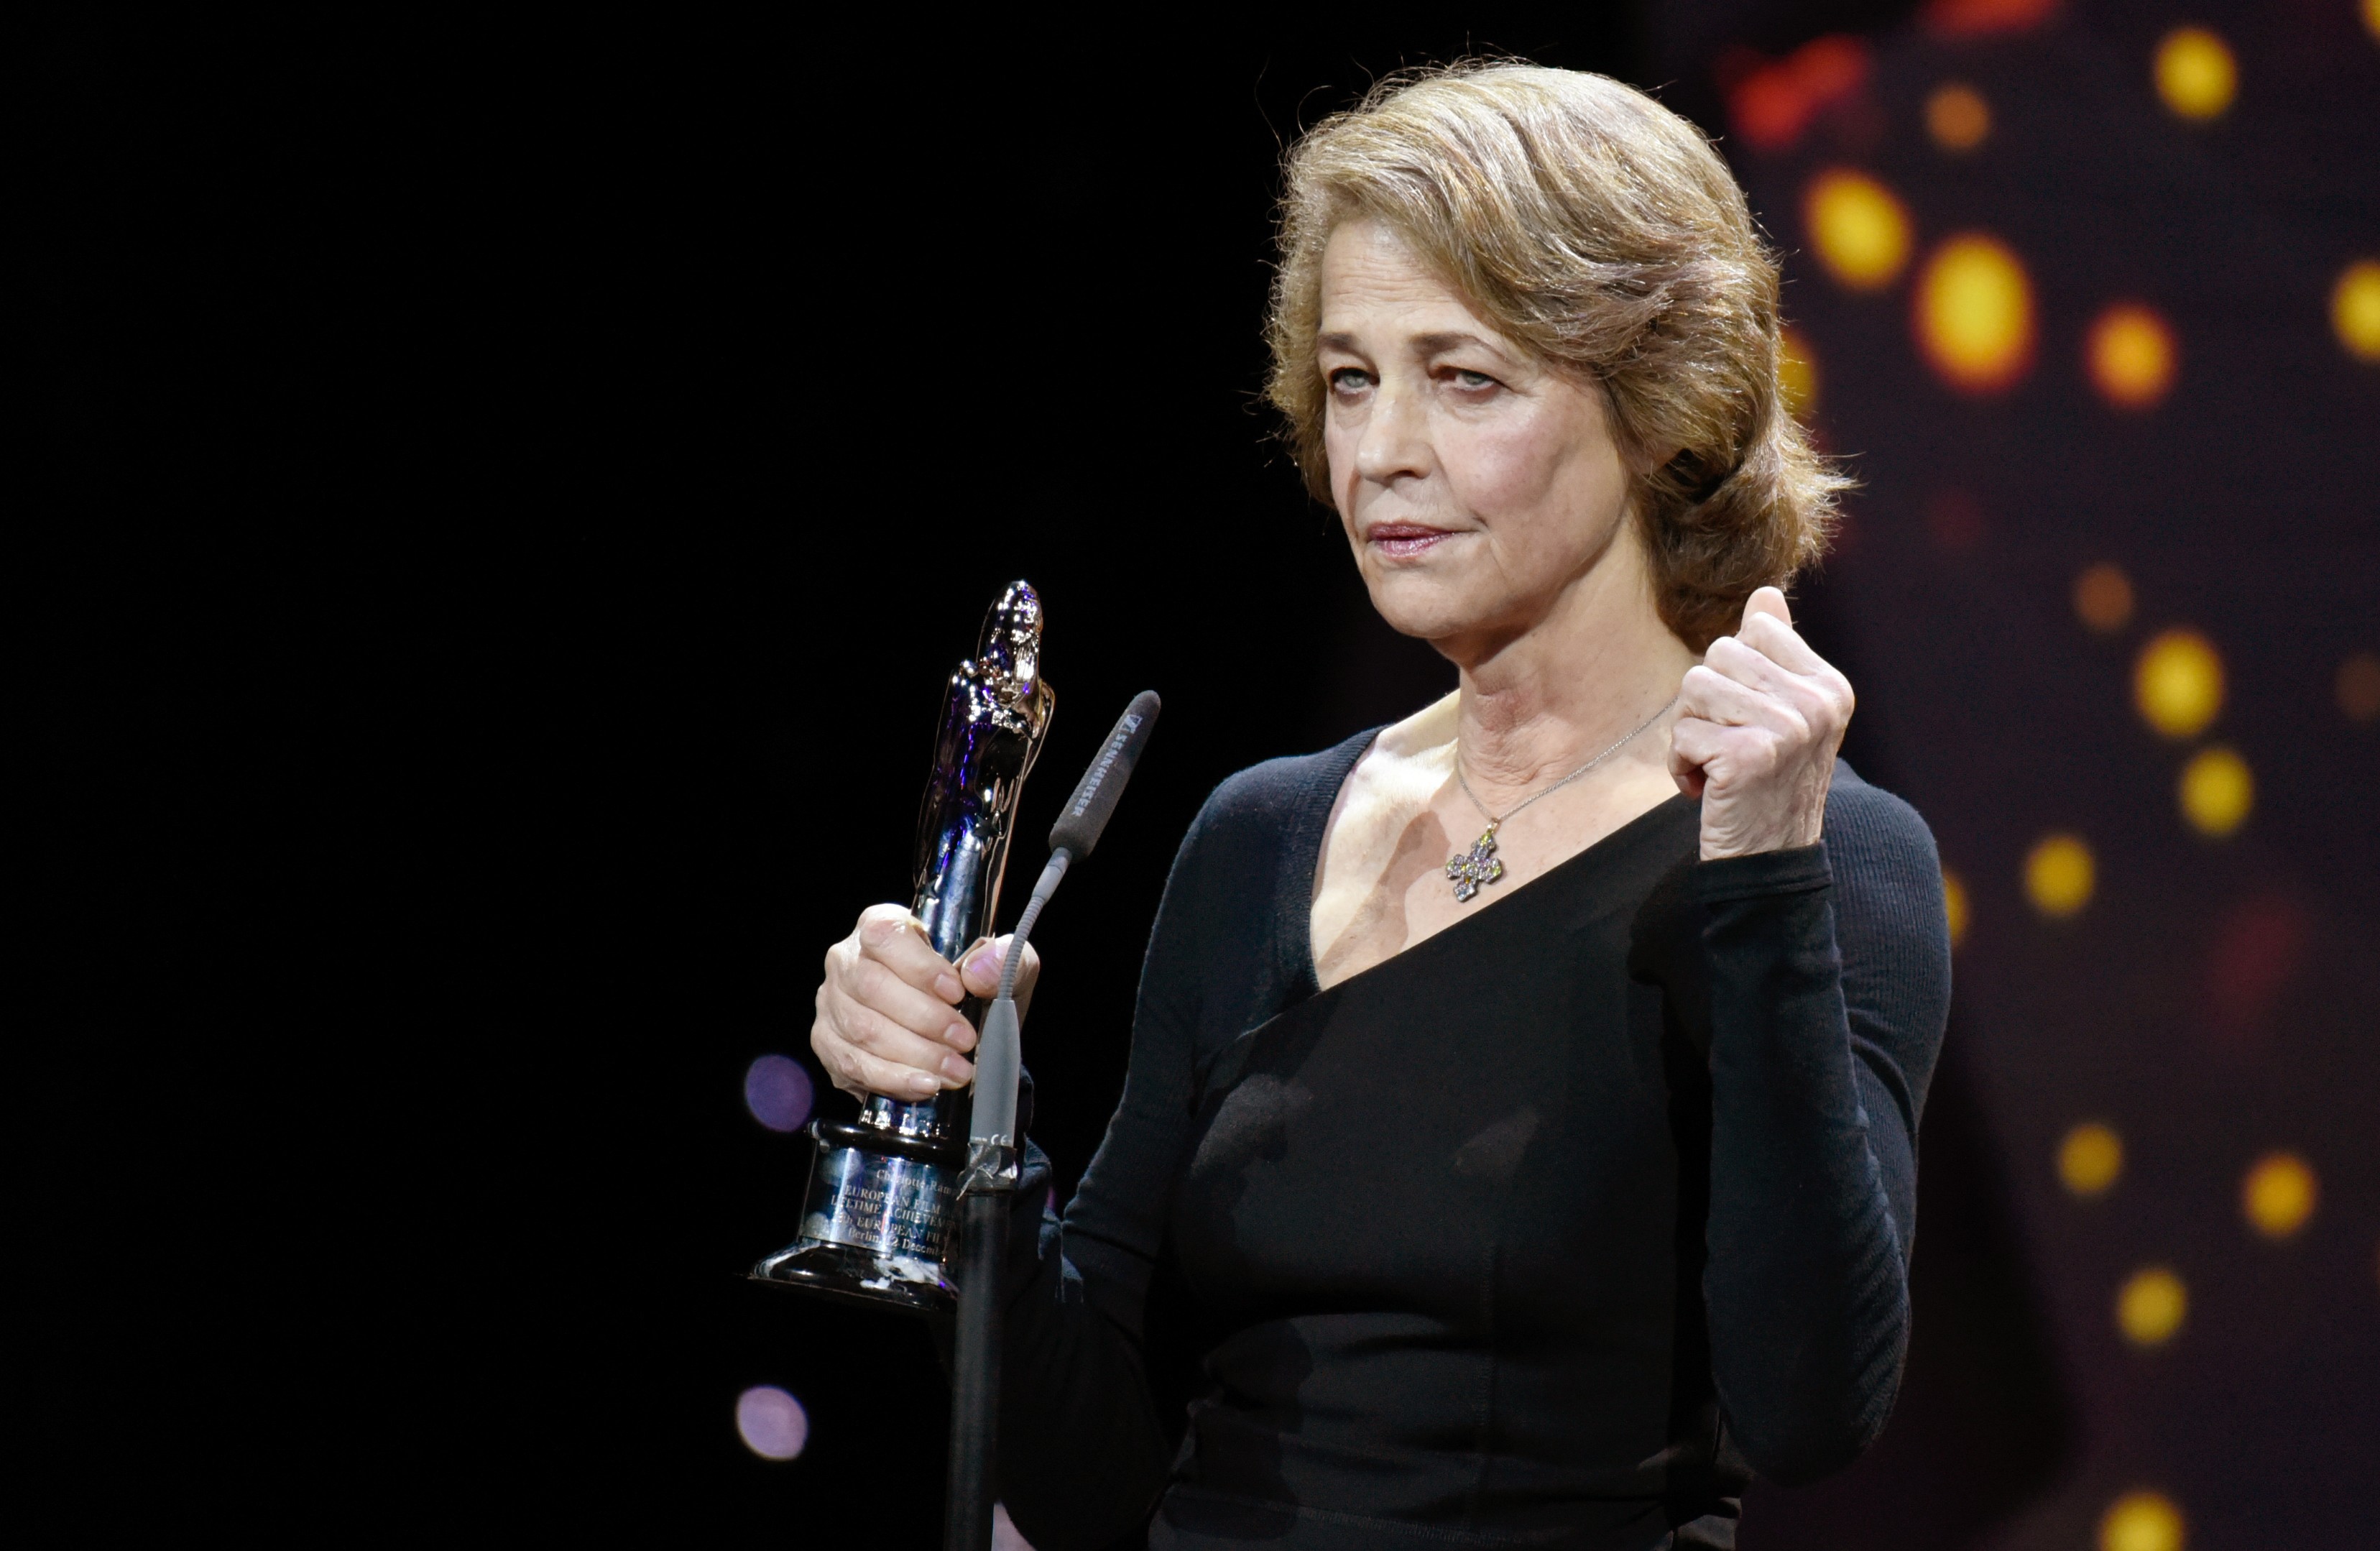 British actress Charlotte Rampling holds her Lifetime Achievement Award during the 28th European Film Award ceremony in Berlin on December 12, 2015. (CLEMENS BILAN—AFP/Getty Images)